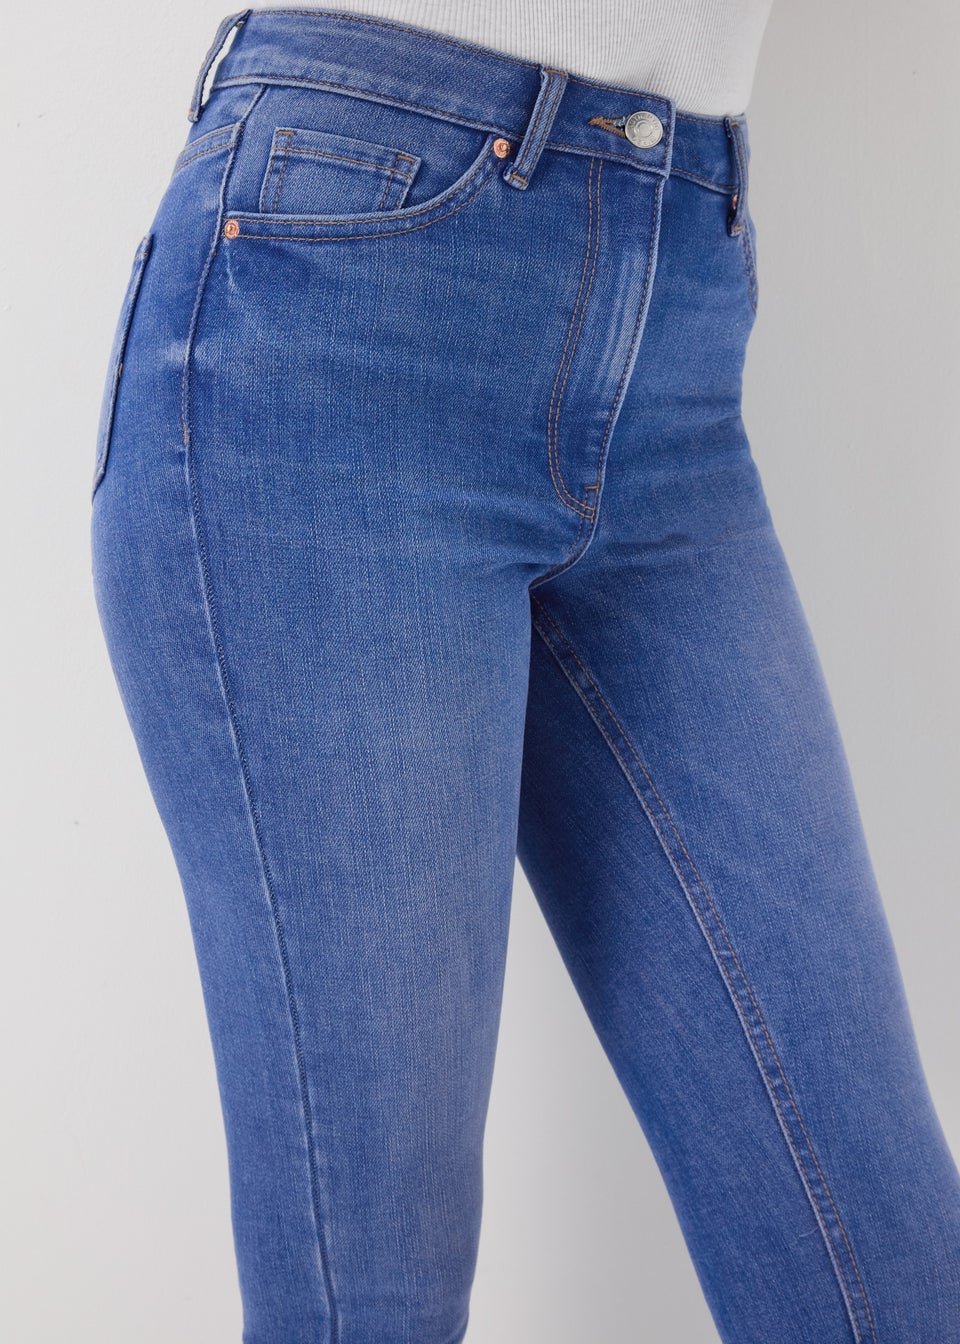 Bright Blue Washed Skinny Jeans